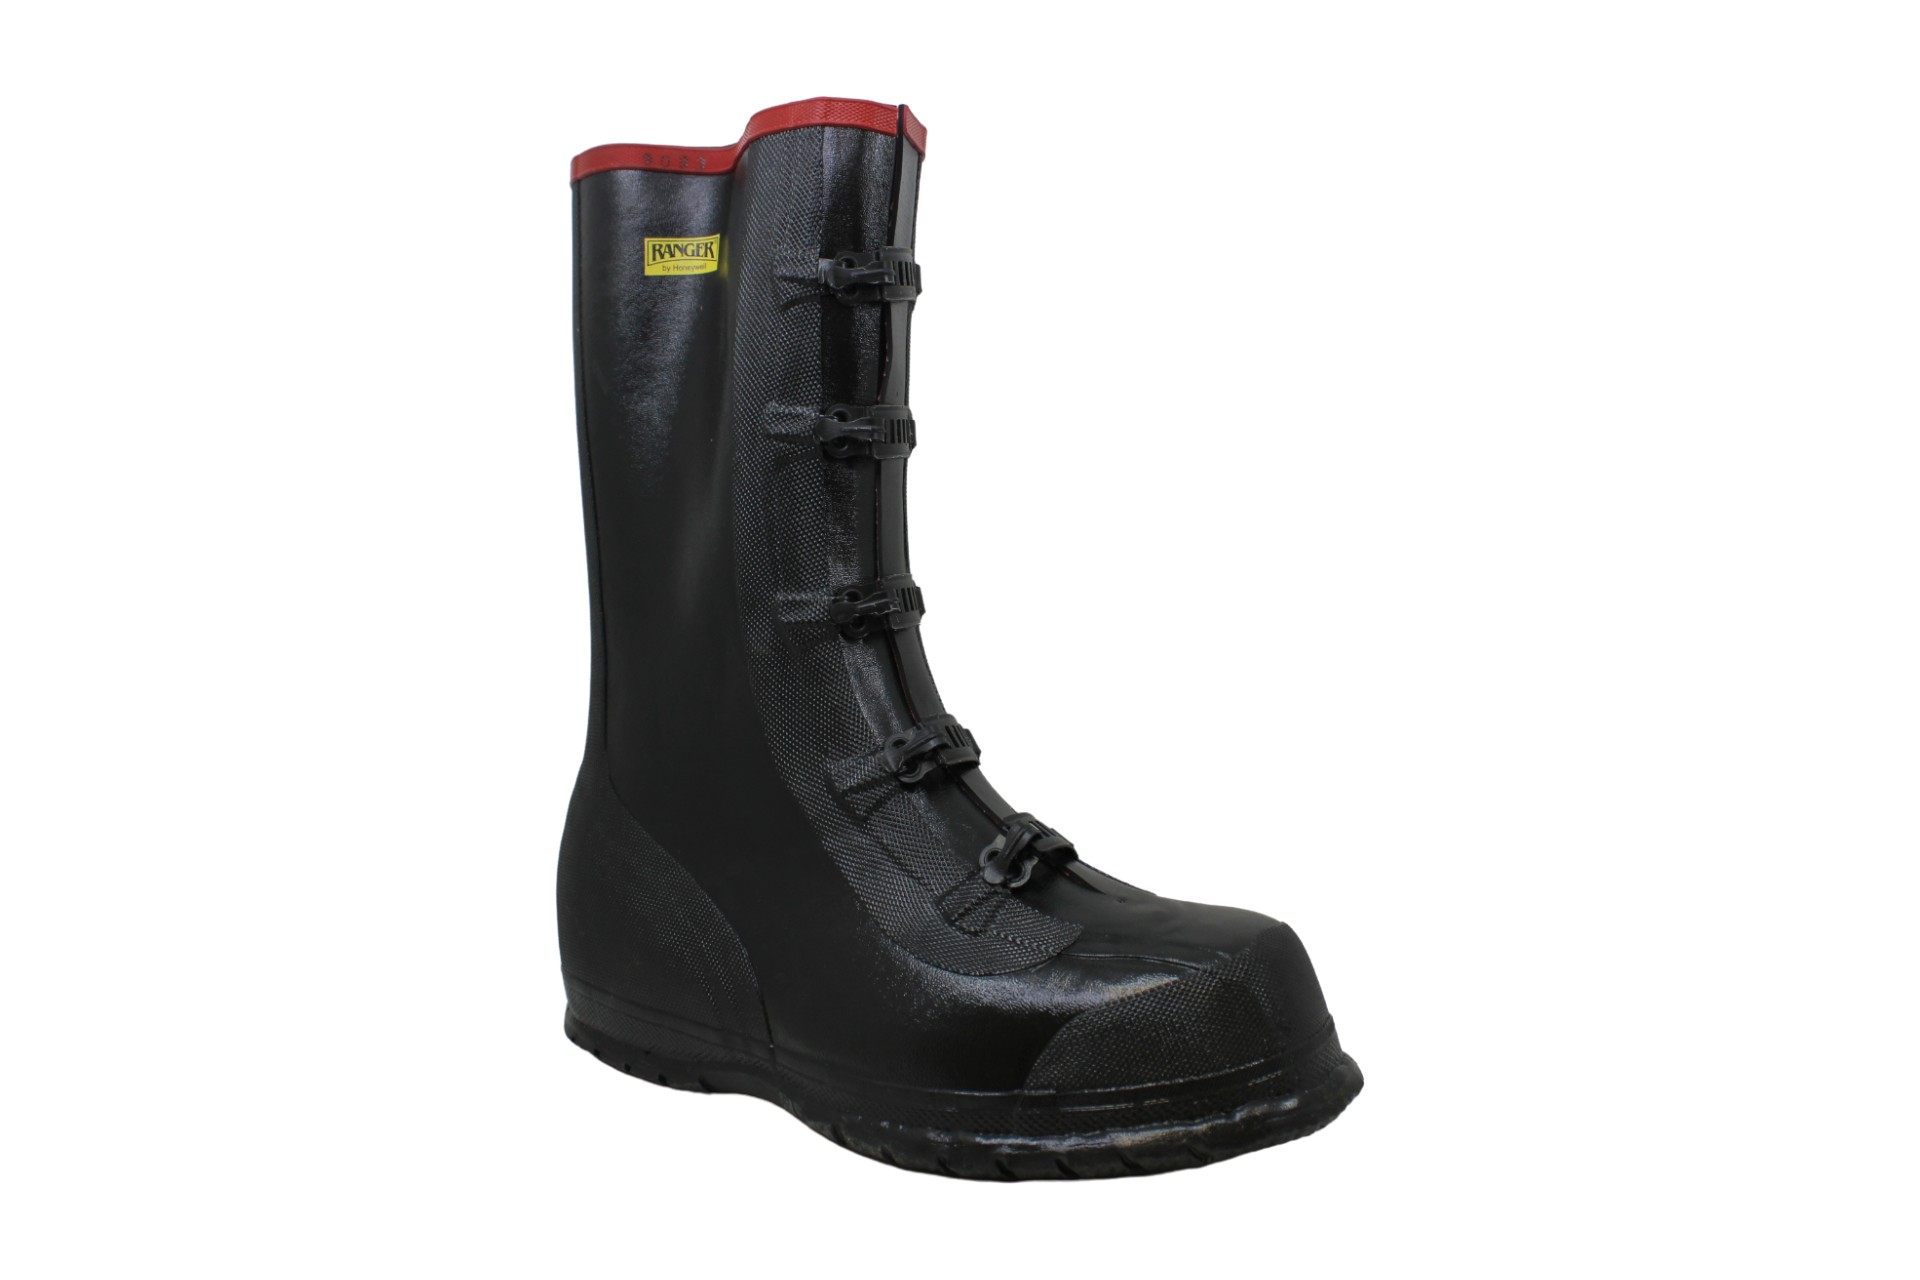 Ranger 15 in Rubber Overshoe Boot Size 11(M) - image 2 of 5